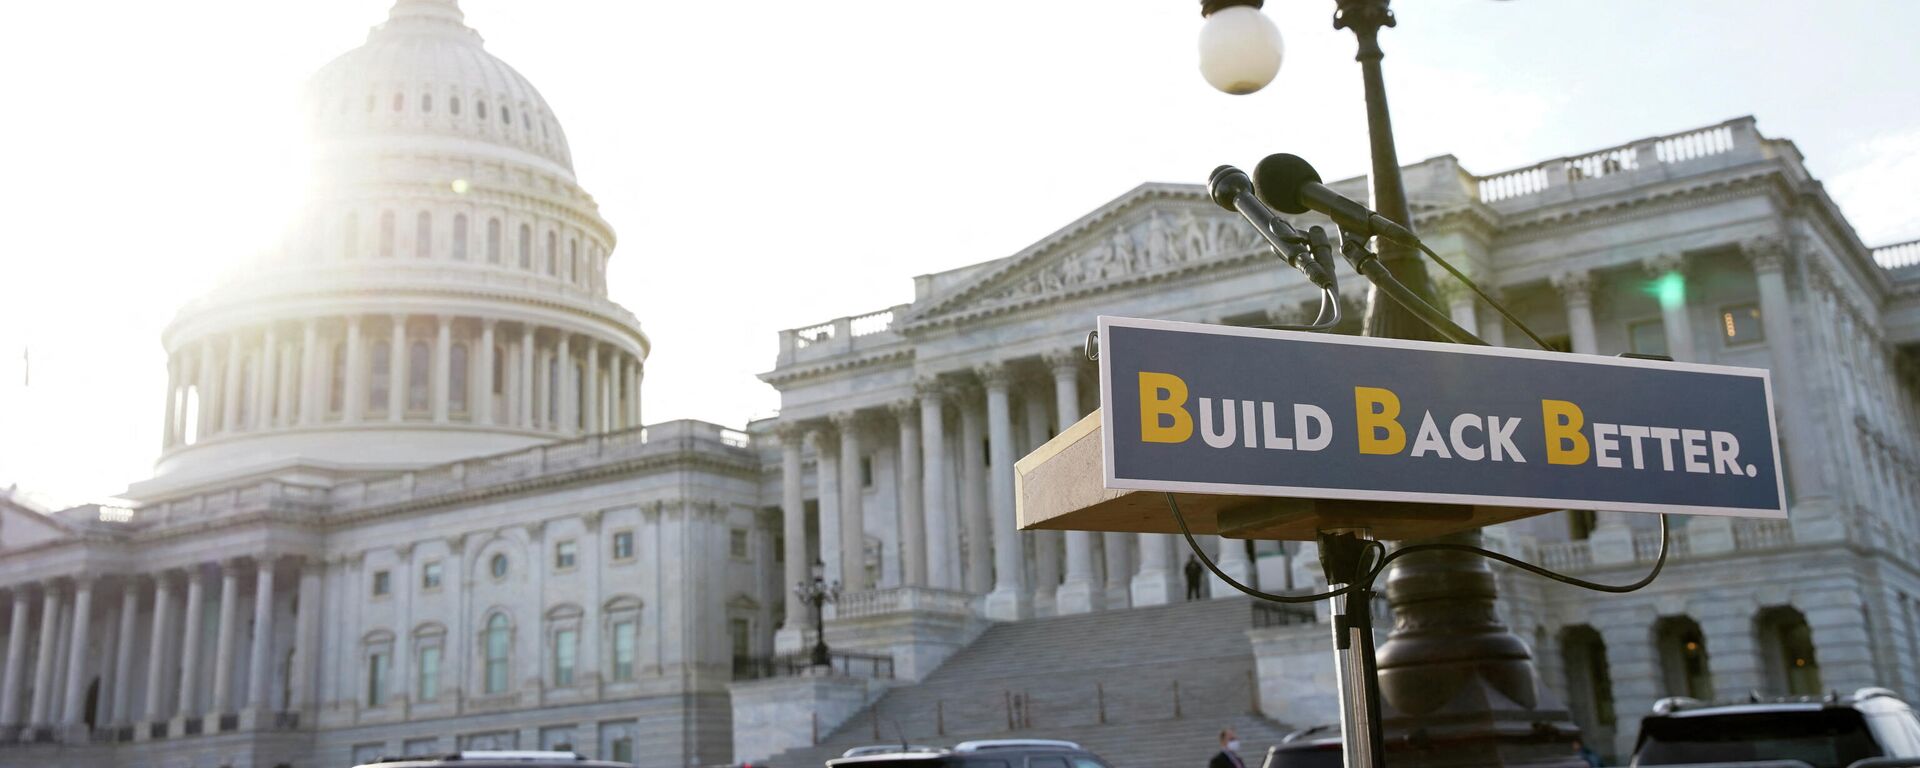 A lectern is seen before the start of a media event about the Build Back Better package with Senate Democrats outside the U.S. Capitol in Washington, December 15, 2021 - Sputnik International, 1920, 22.12.2021